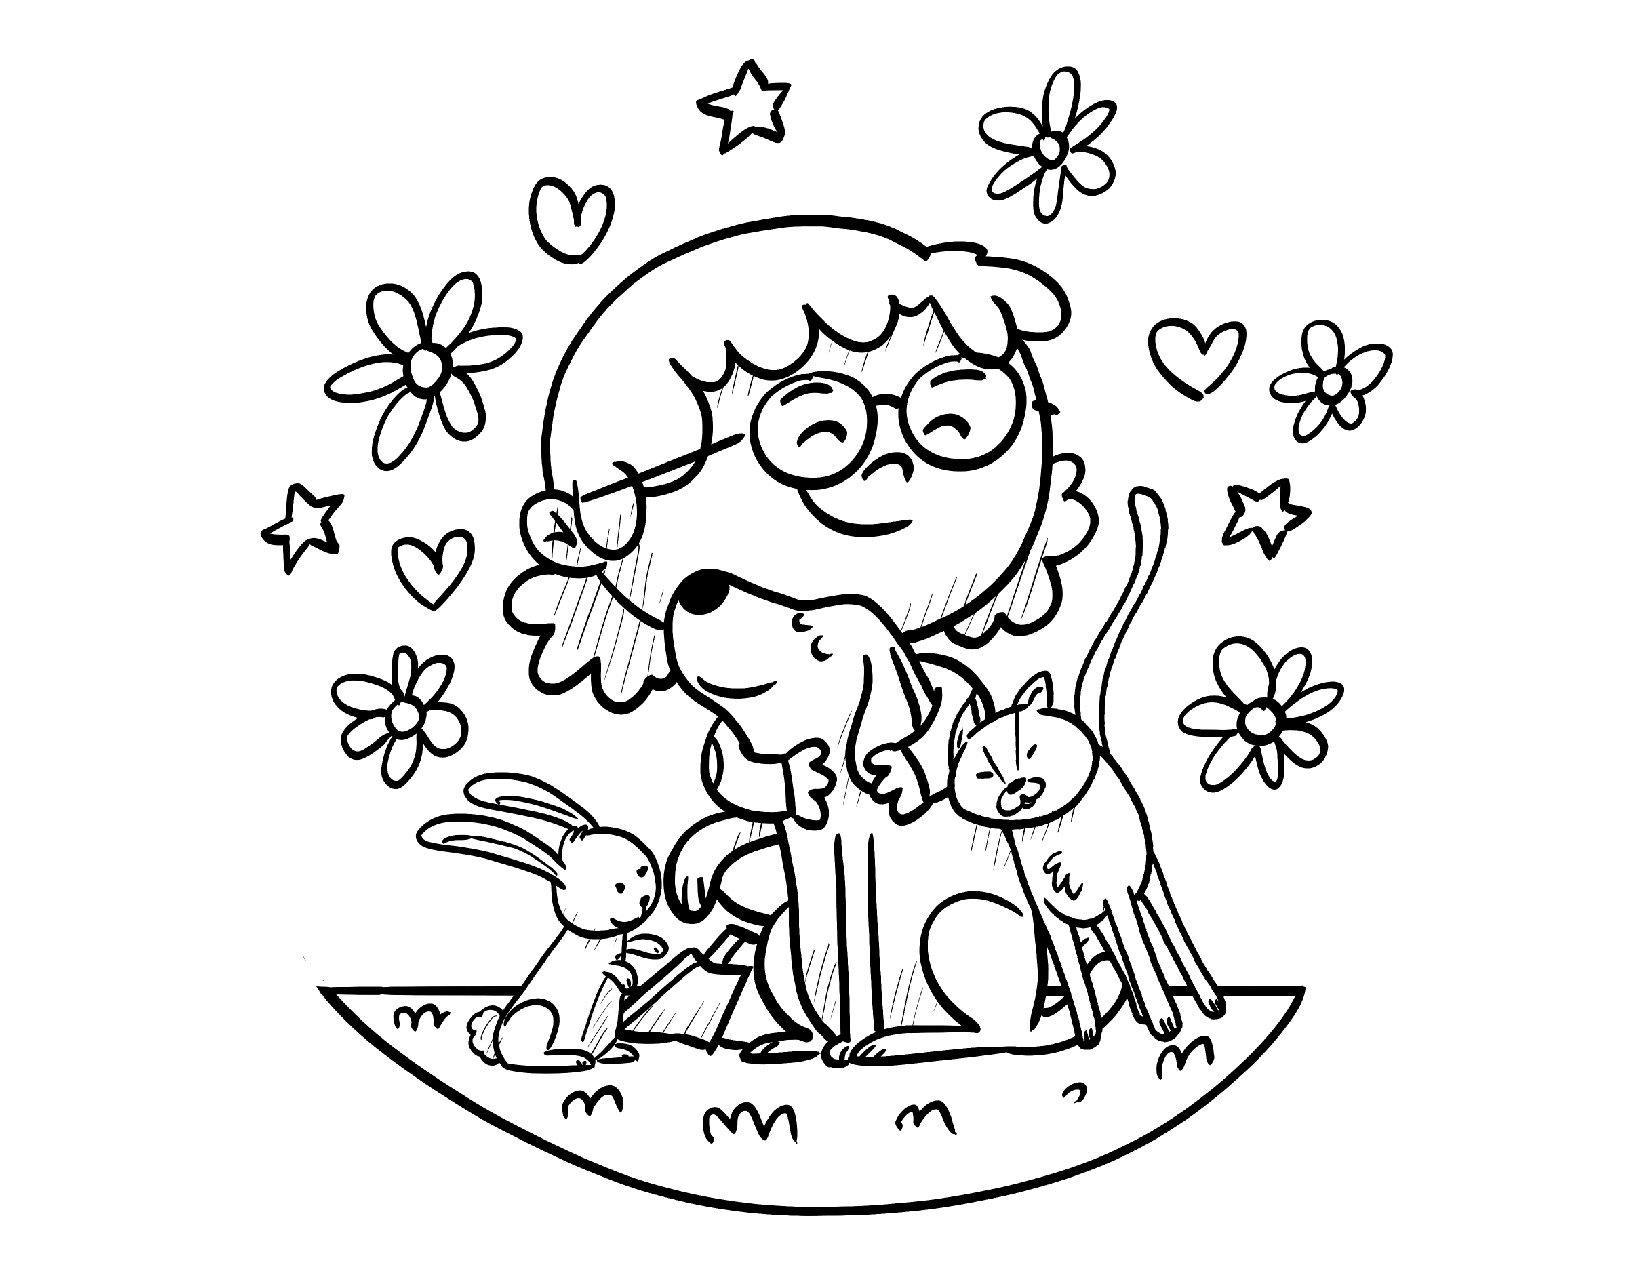 Coloring Page of a little girl hugging her dog